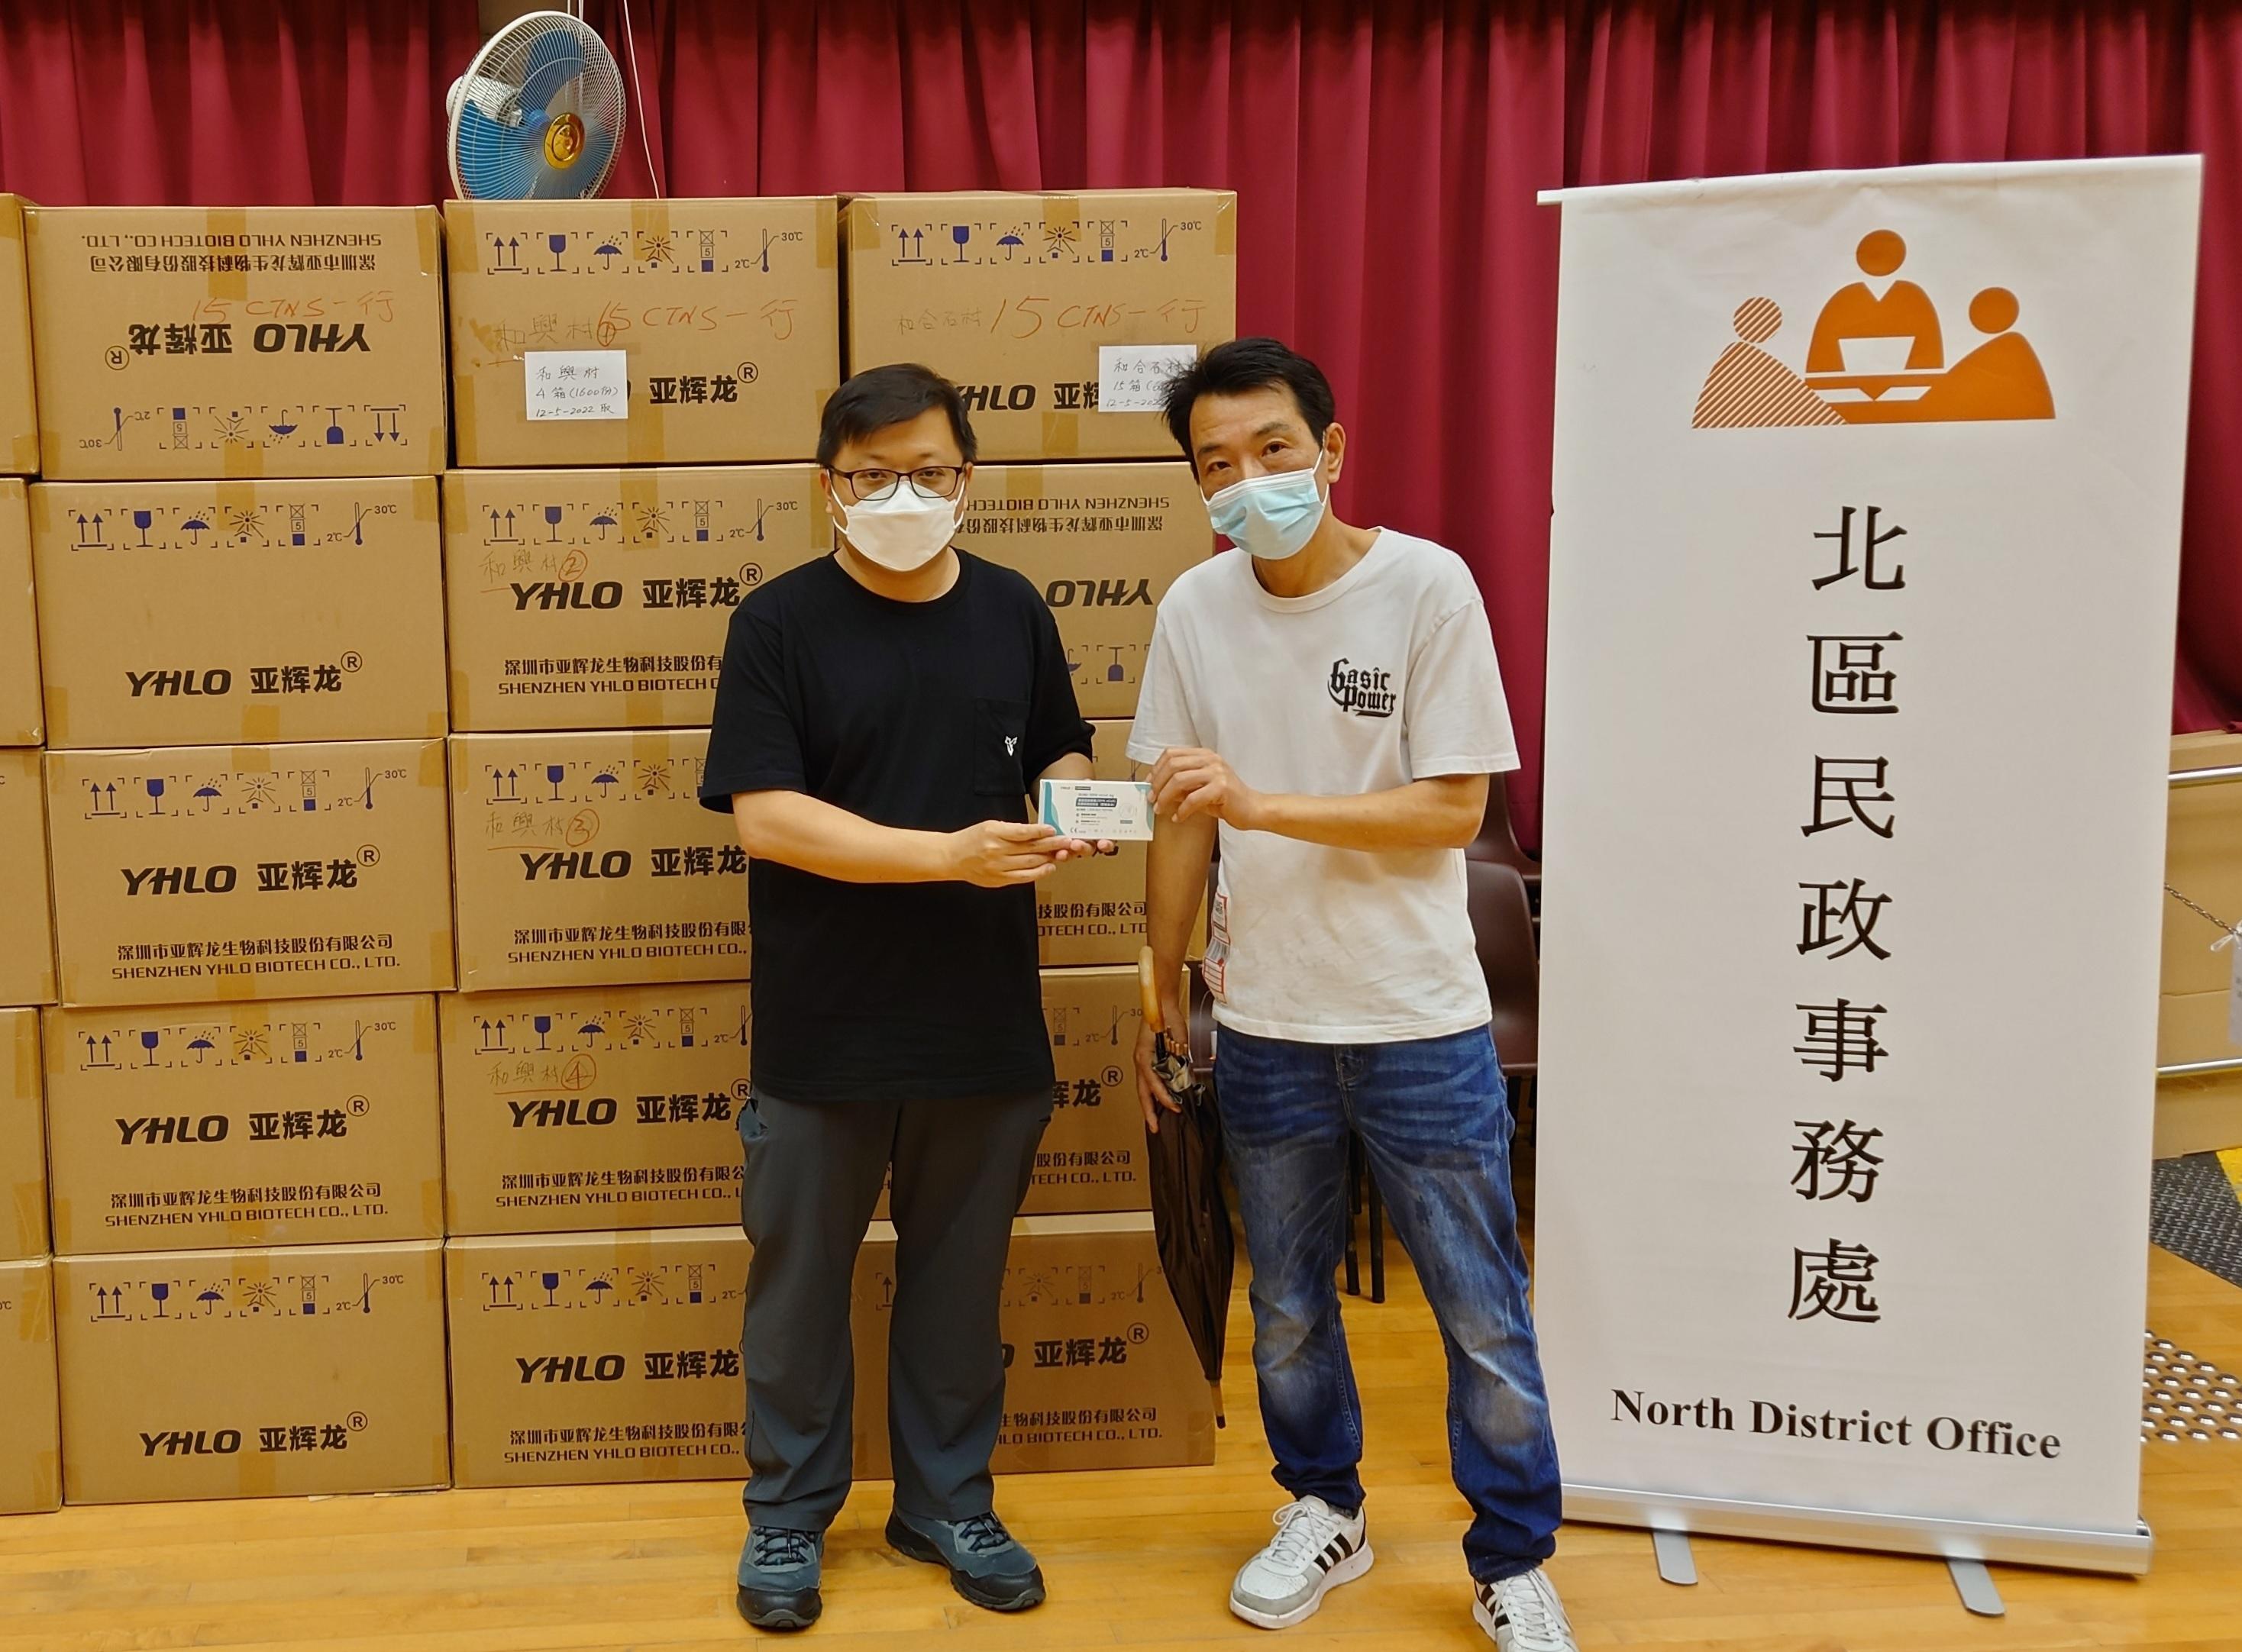 The North District Office today (May 12) distributed COVID-19 rapid test kits to households living in Wo Hop Shek Village for voluntary testing through the Village Representatives.